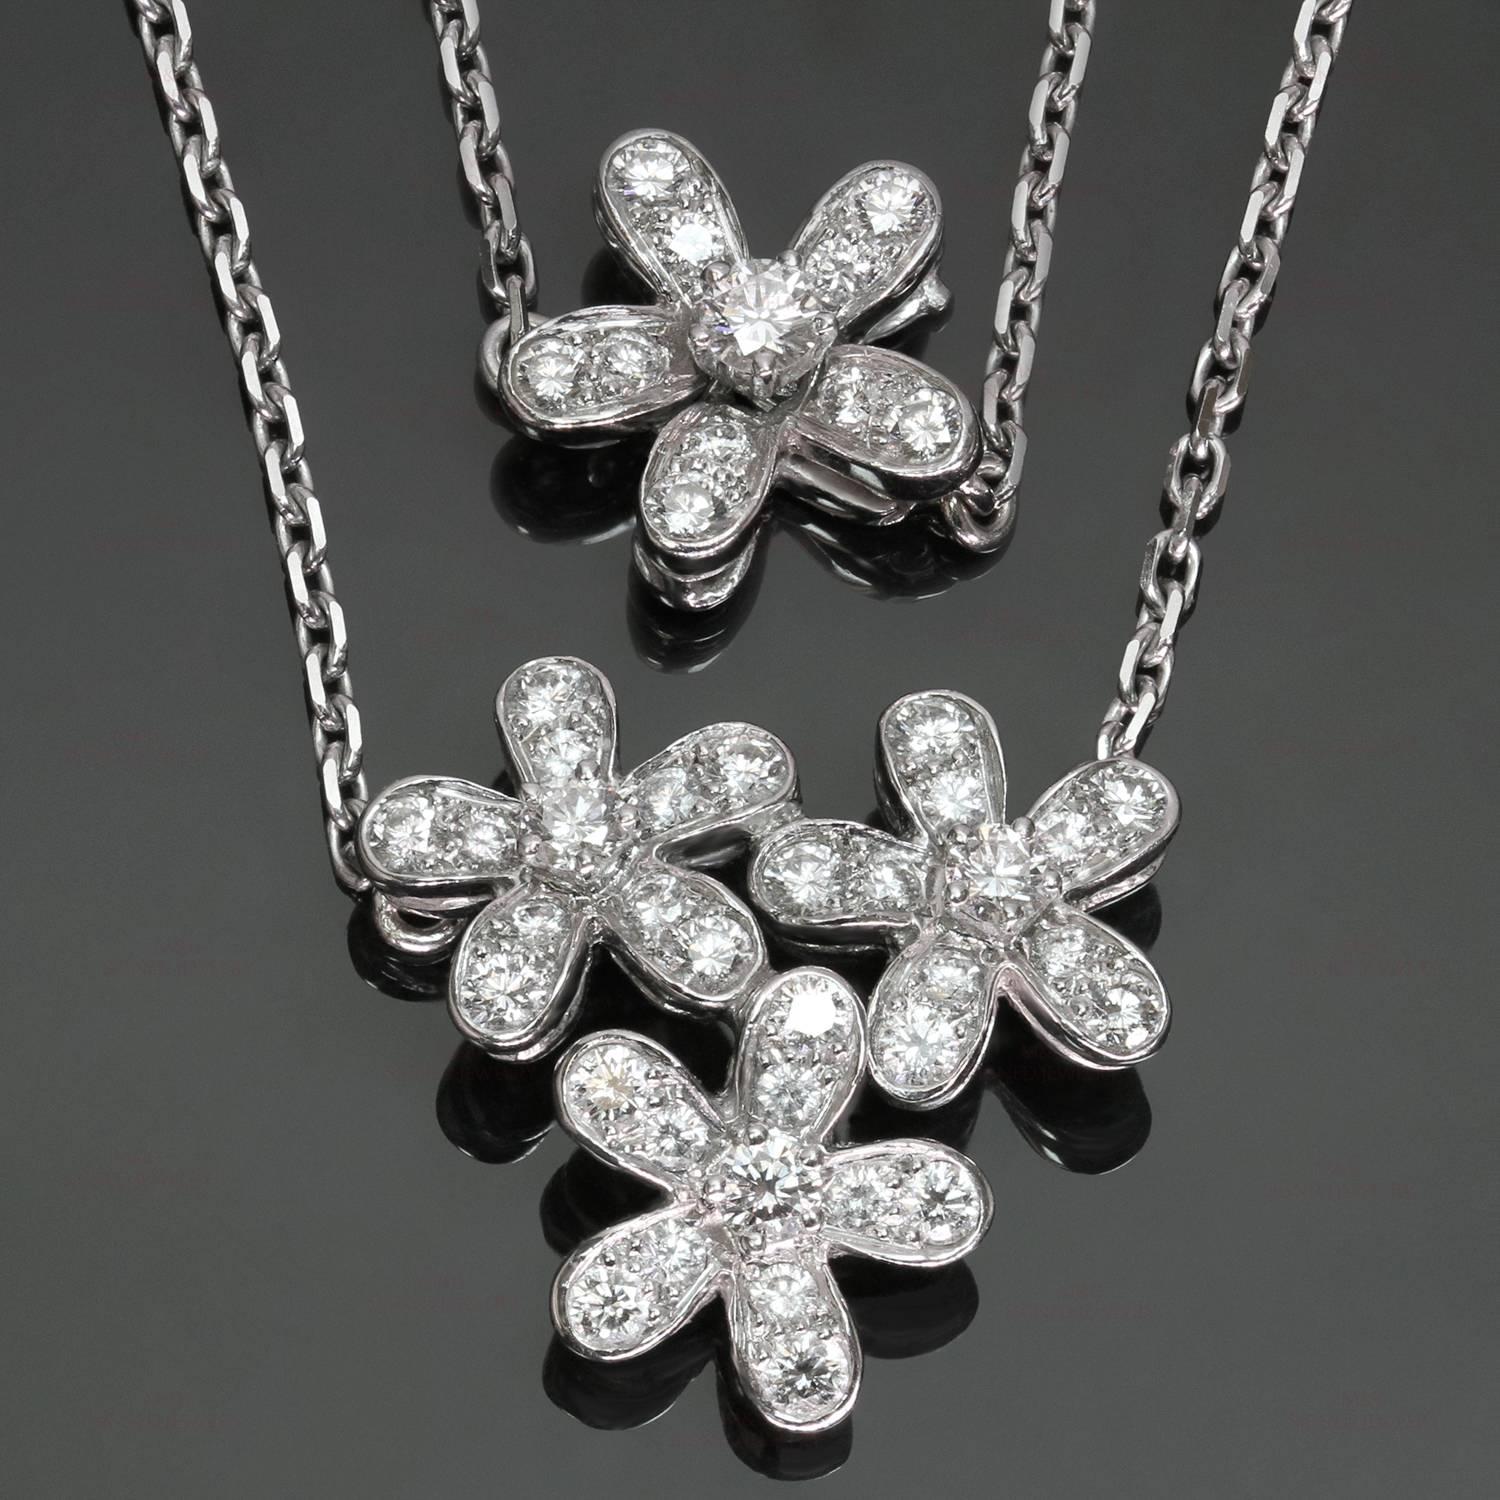 This stunning Van Cleef & Arpels necklace from the Socrate collection features a sparkling 3-flower pendant completed with a sparkling floral clasp, crafted in 18k white gold and set with brilliant-cut round diamonds of an estimated 0.91 carats,